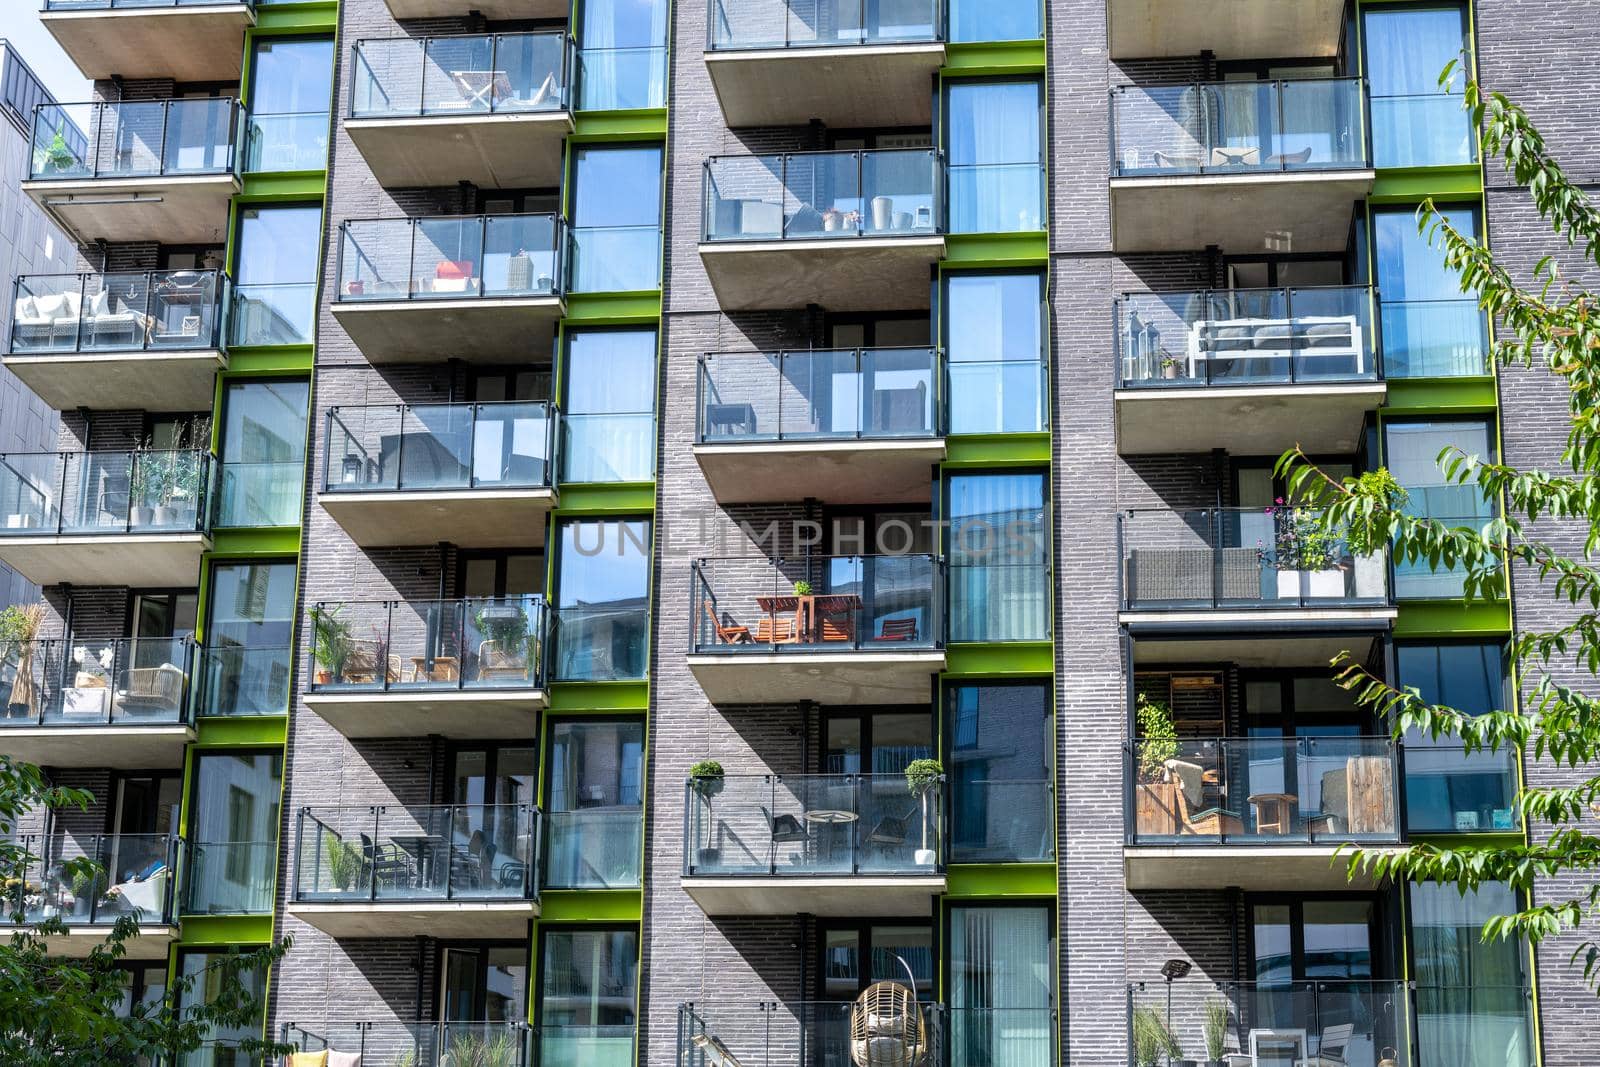 Detail of a modern apartment building with many balconies seen in Berlin, Germany